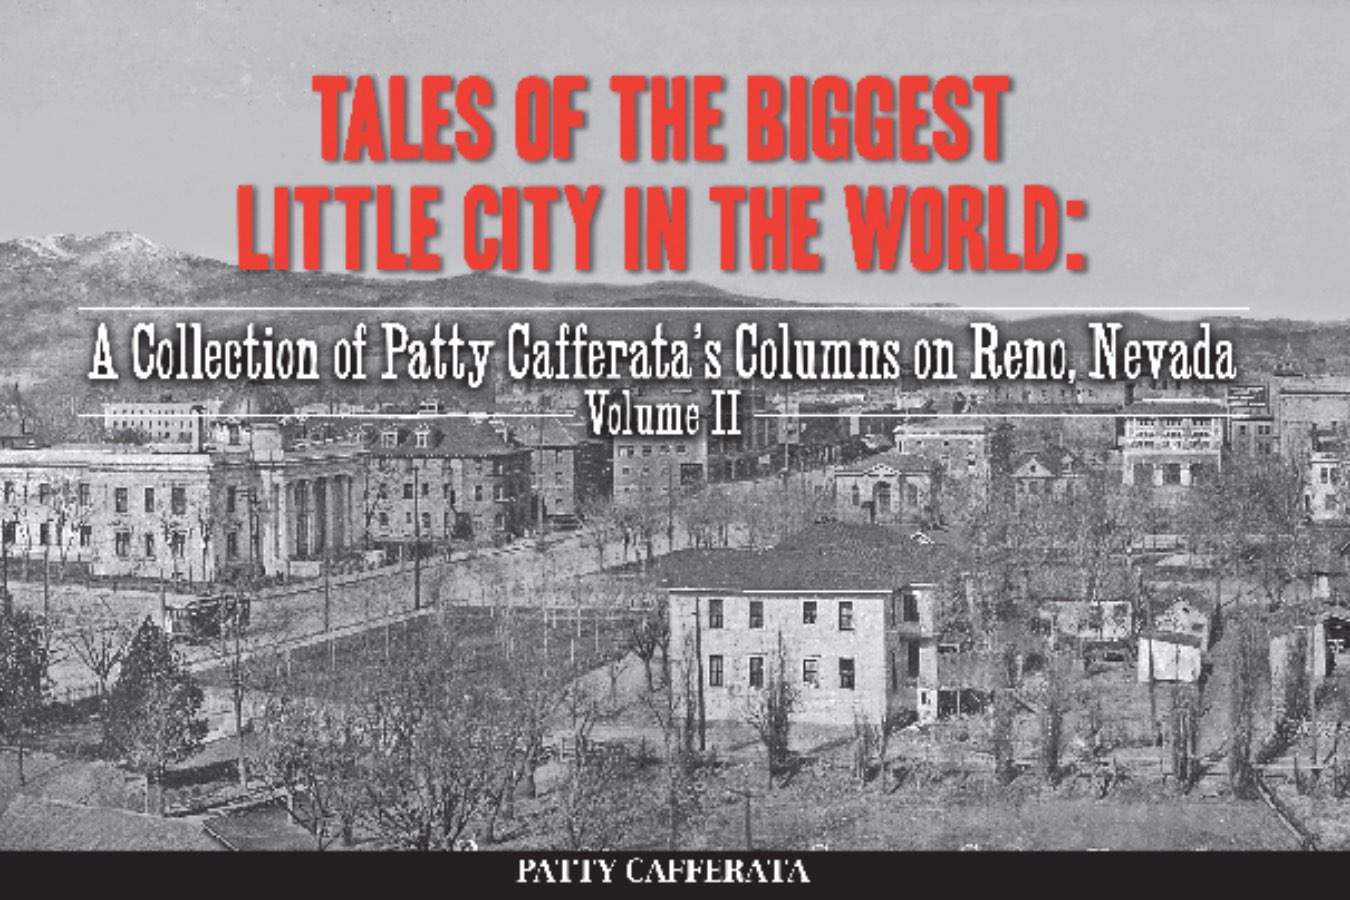 Tales of the Biggest Little City in the World: A Collection of Patty Cafferata's Columns on Reno, Nevada, Volume II Image